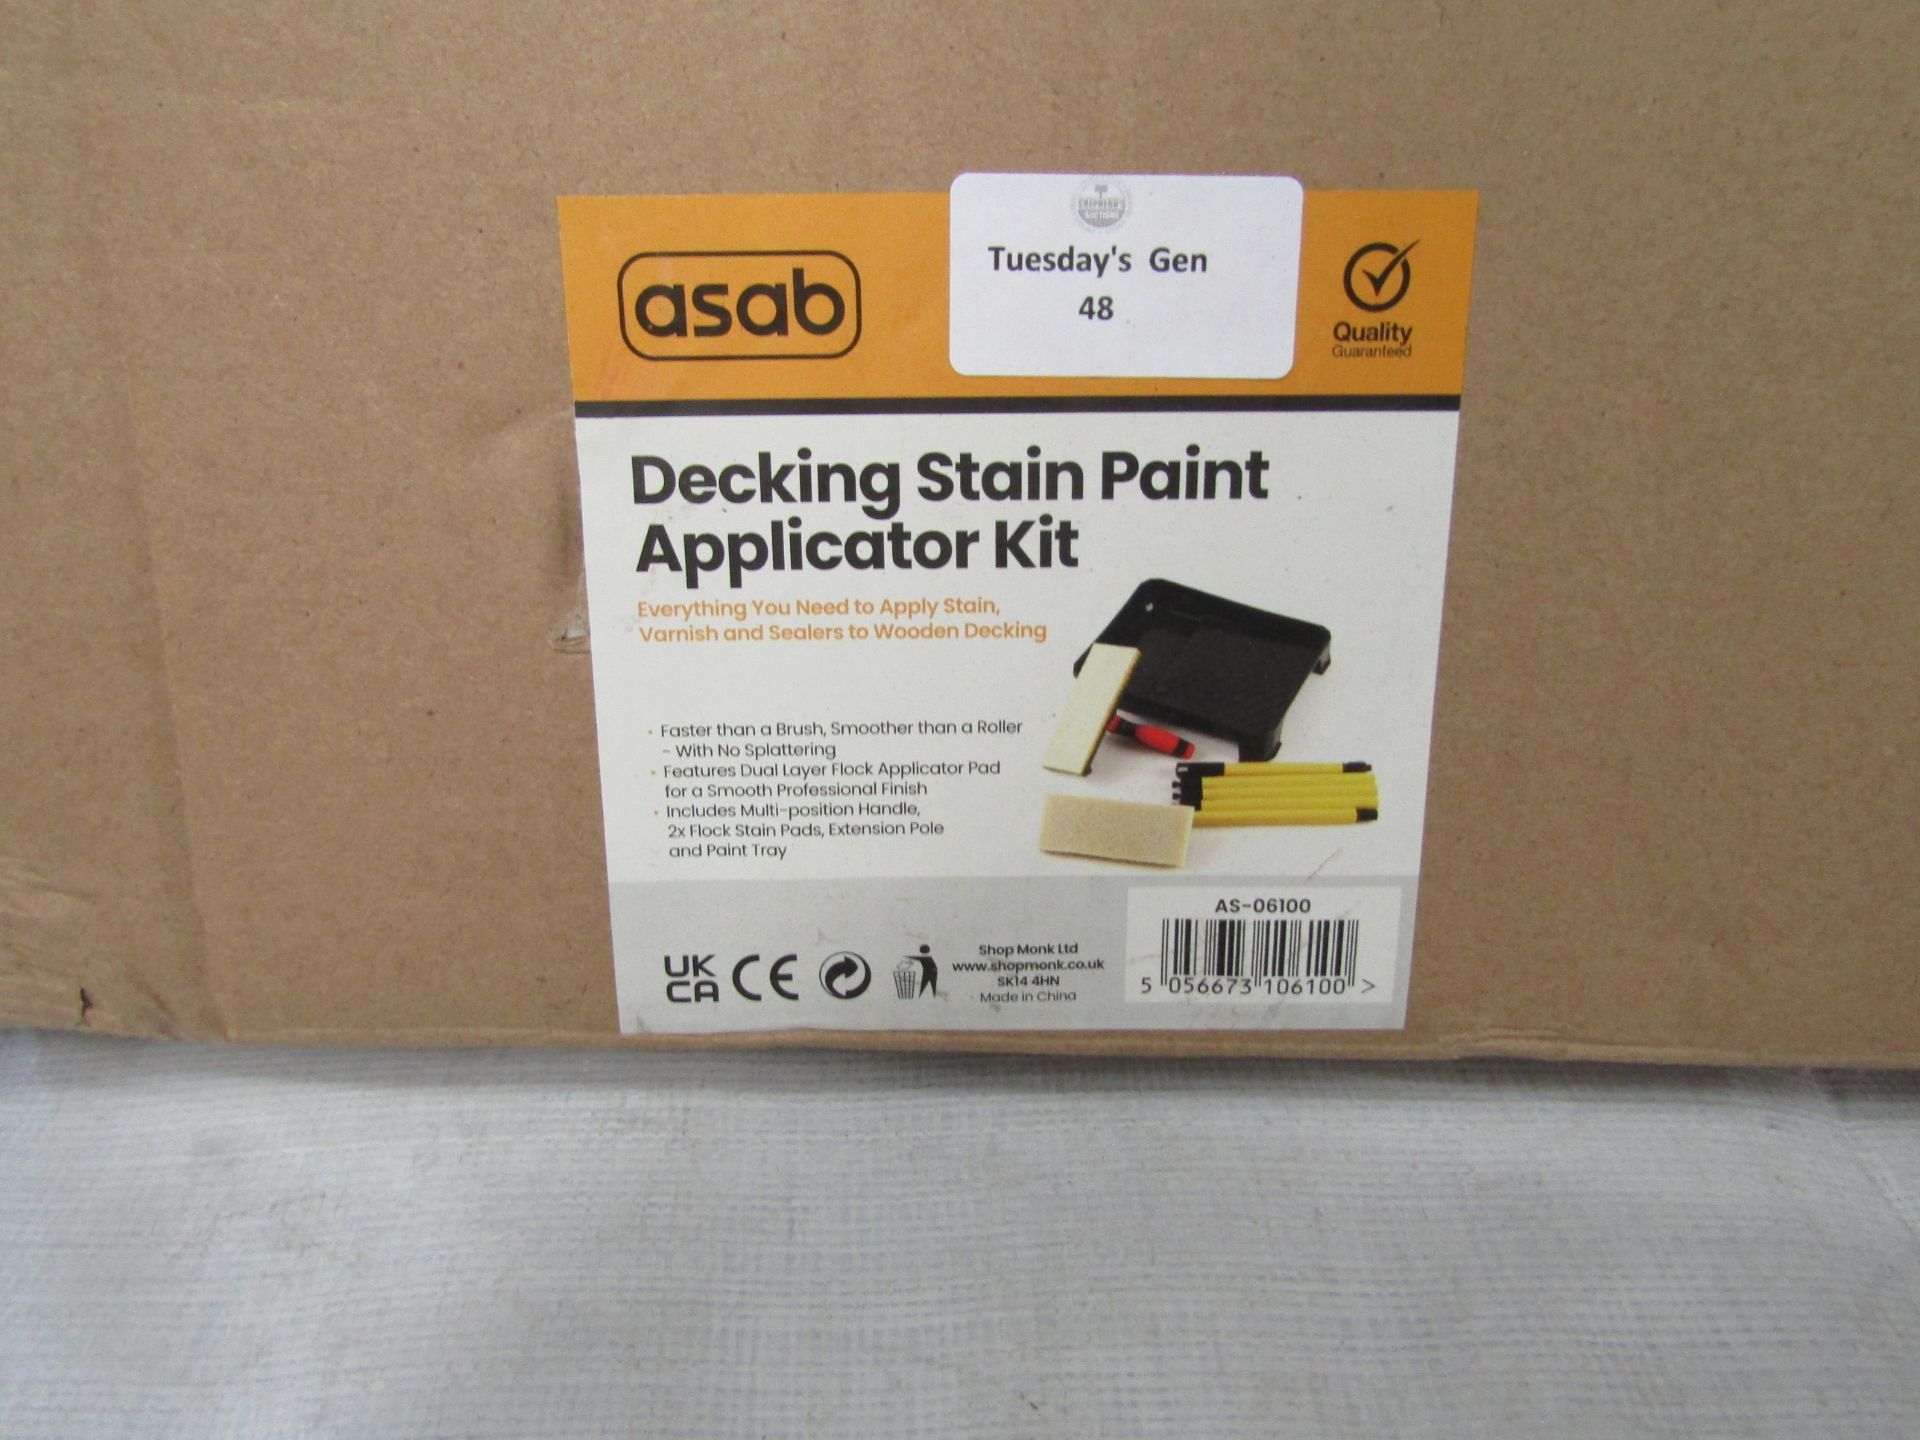 Asab - Decking Stain Paint Applicator Kit - Unchecked & Boxed.